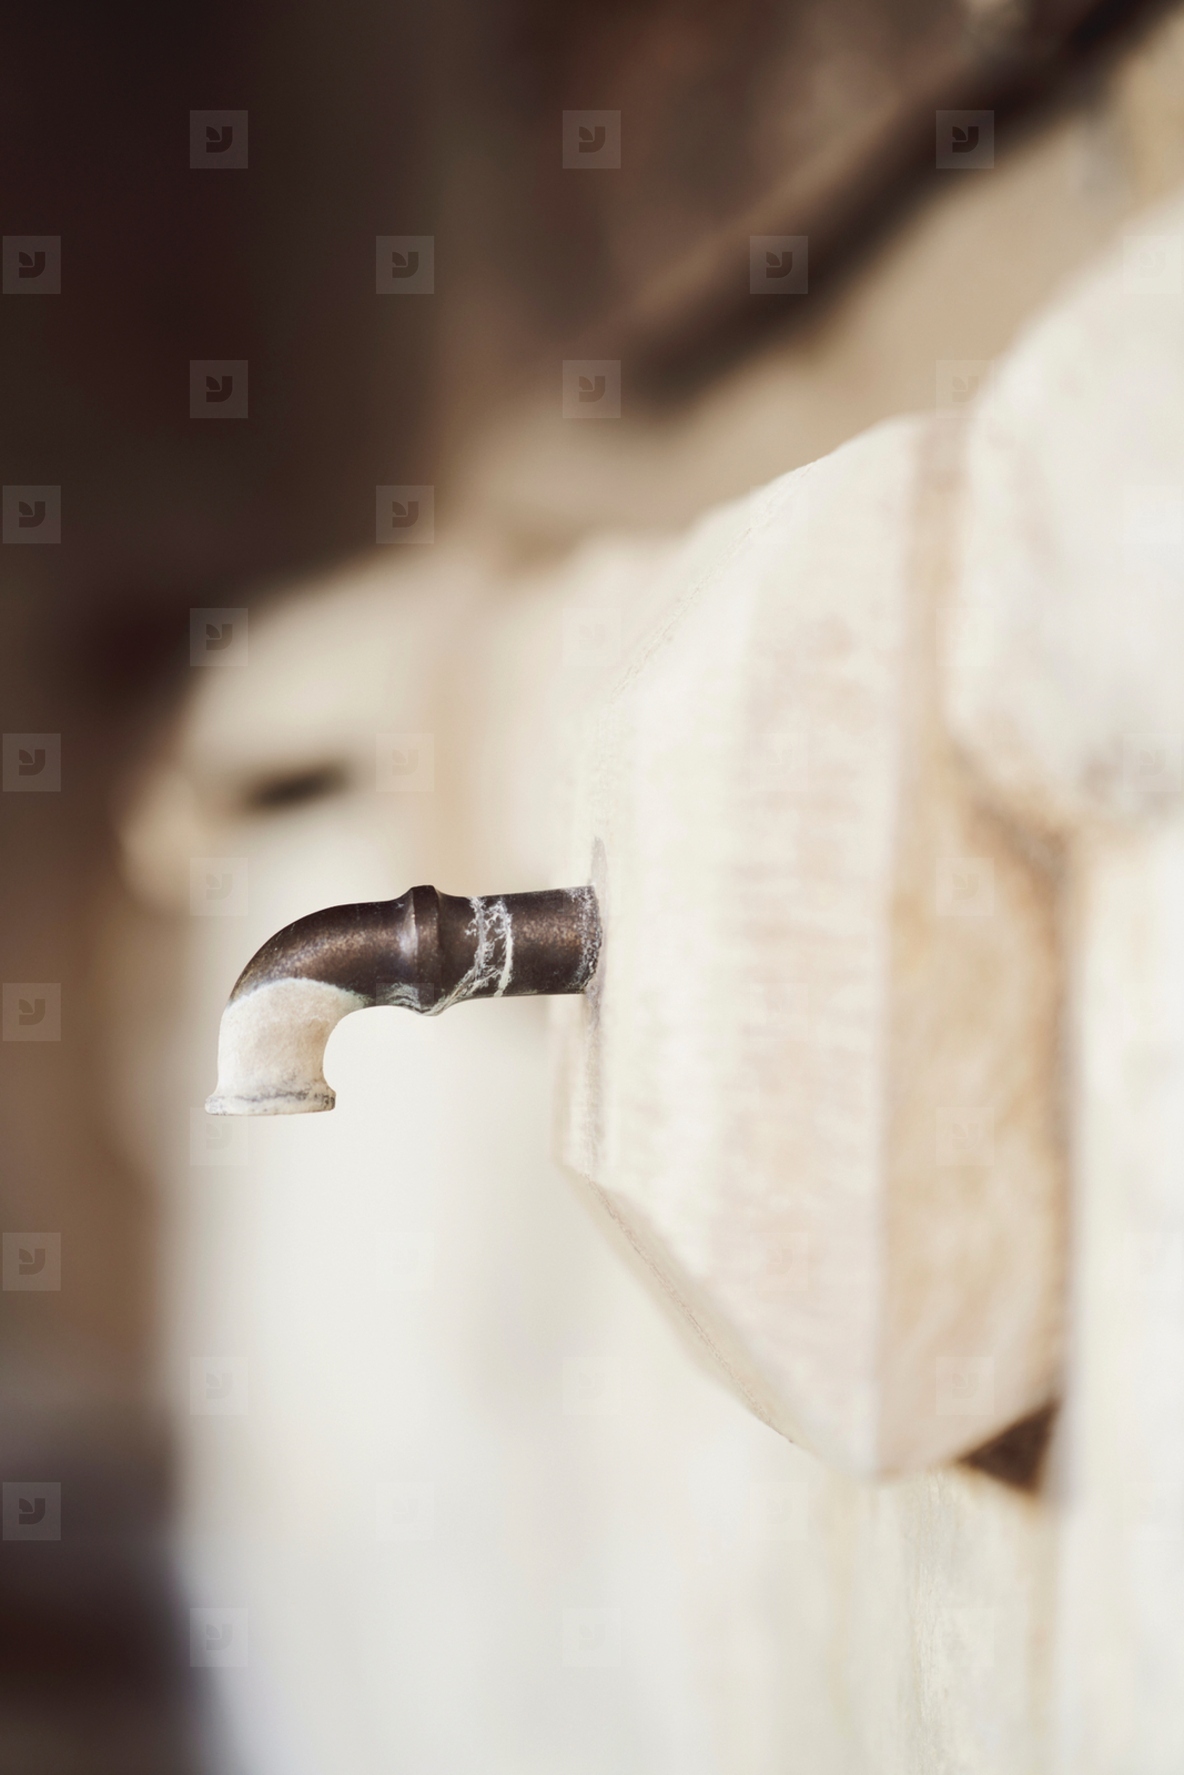 Paint on faucet at stone wall